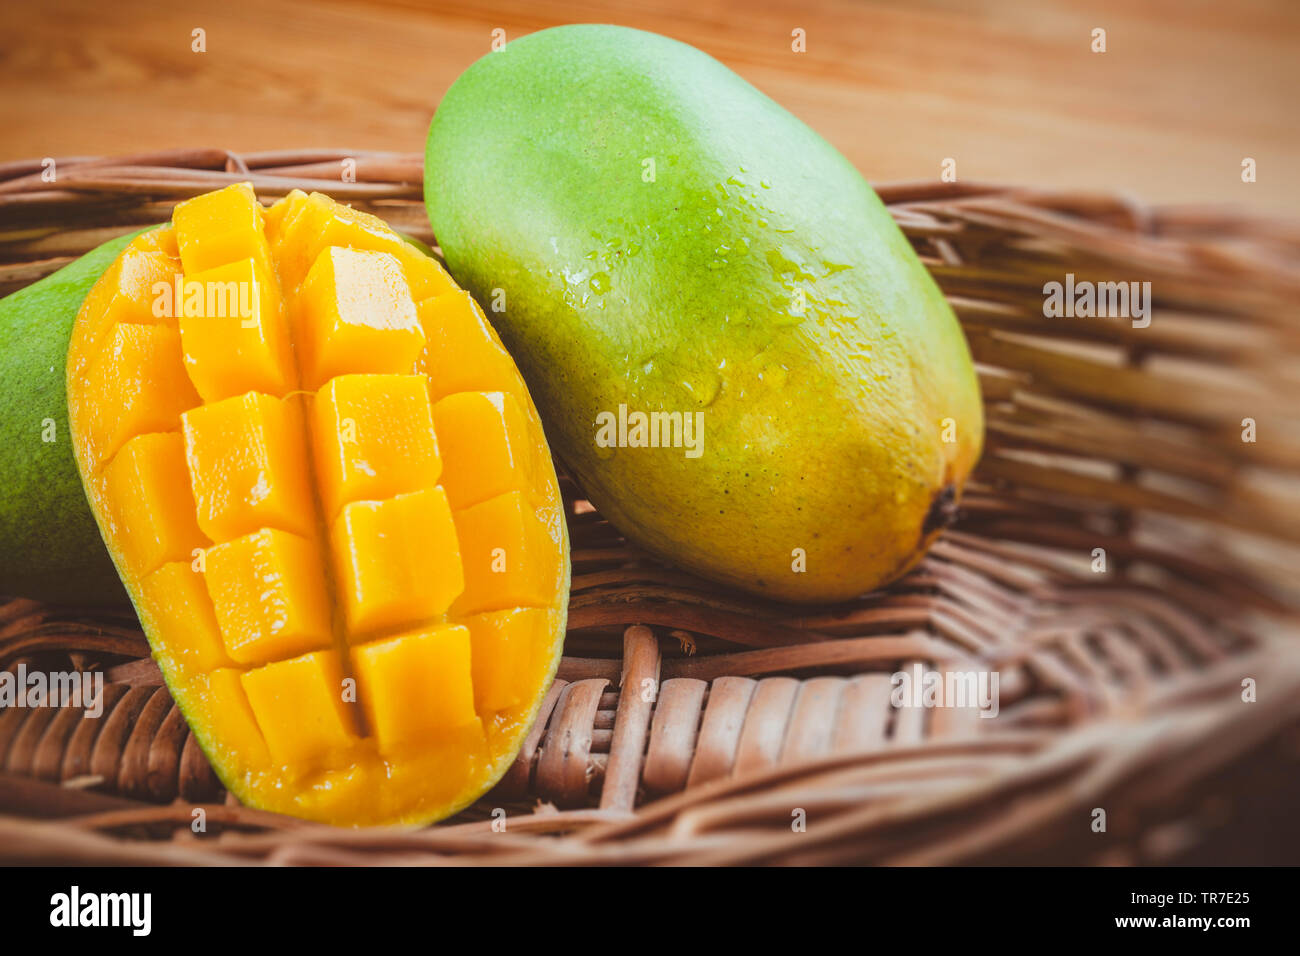 Close-up of fresh green Dashehari mangoes and its slice placed in wooden basket on wooden table. Stock Photo